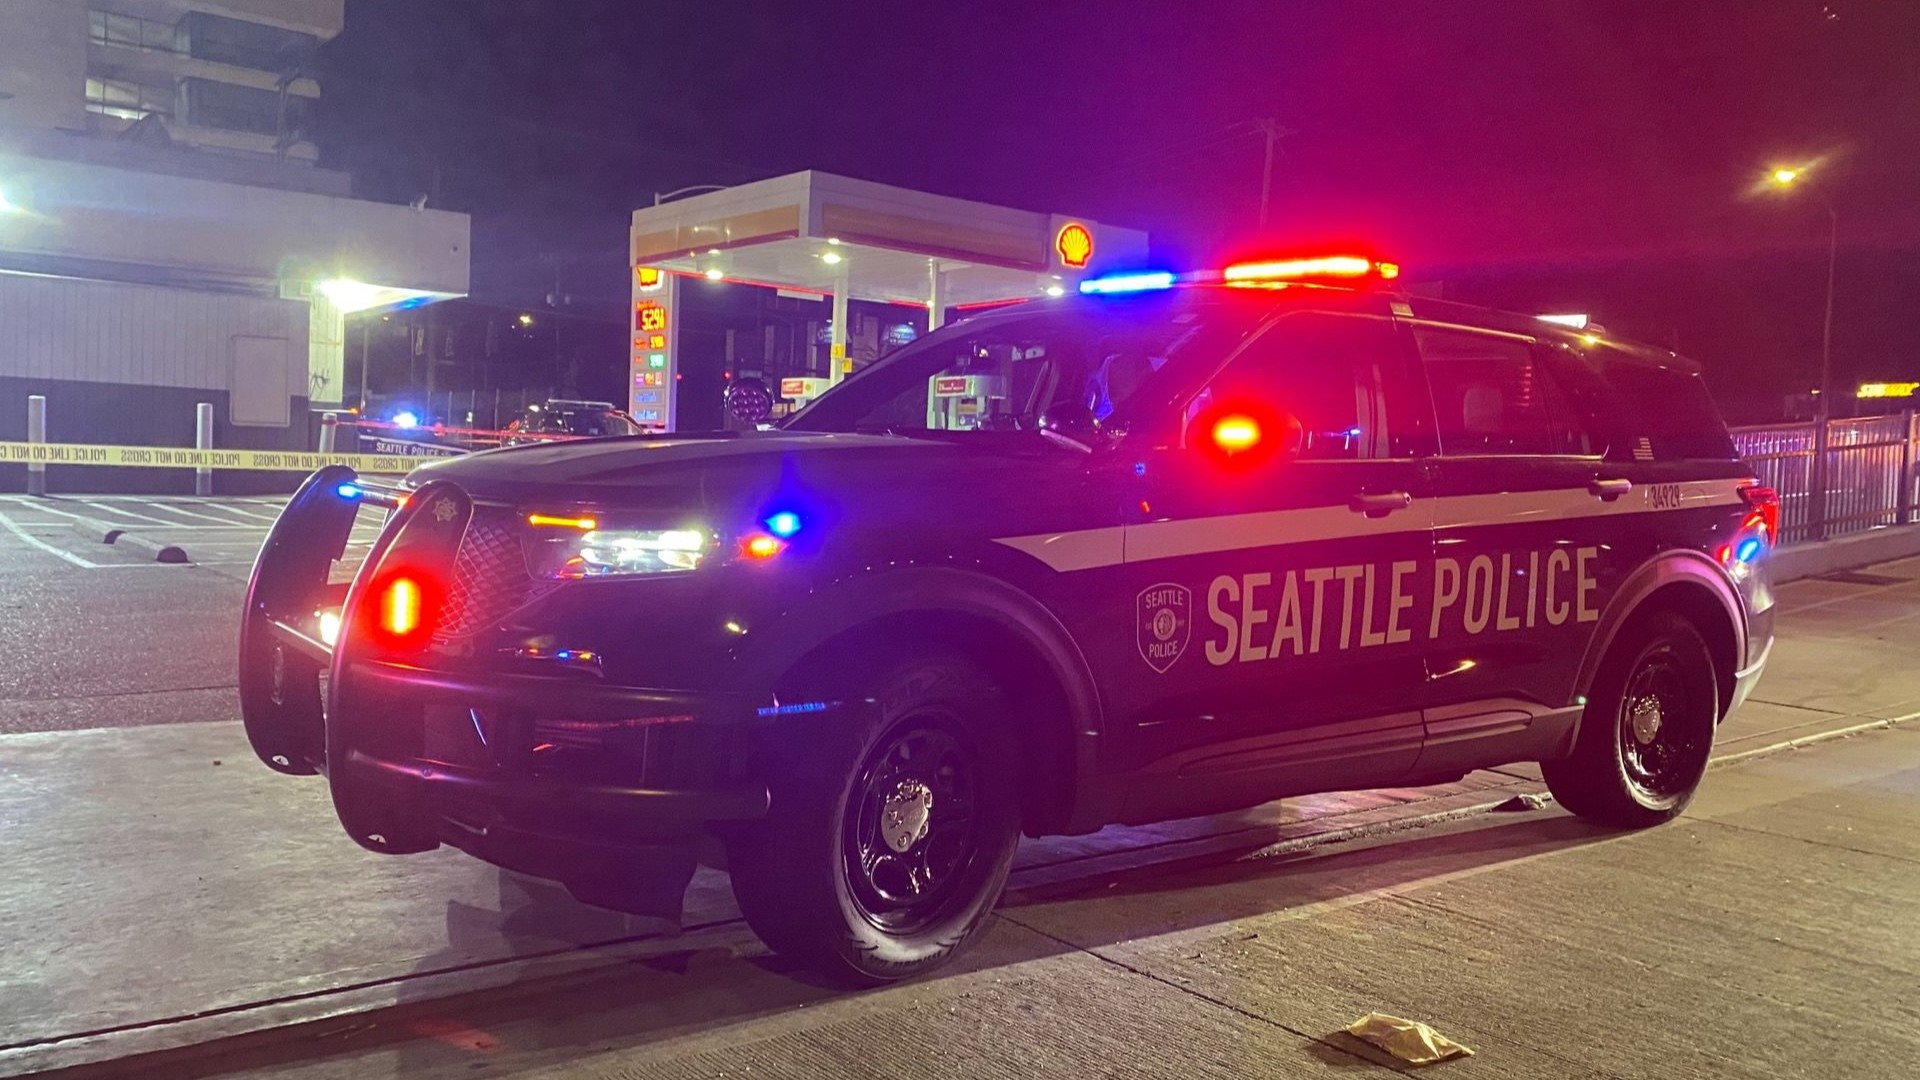 Police are searching for the suspect in a deadly shooting that killed one person in Seattle's SODO neighborhood.